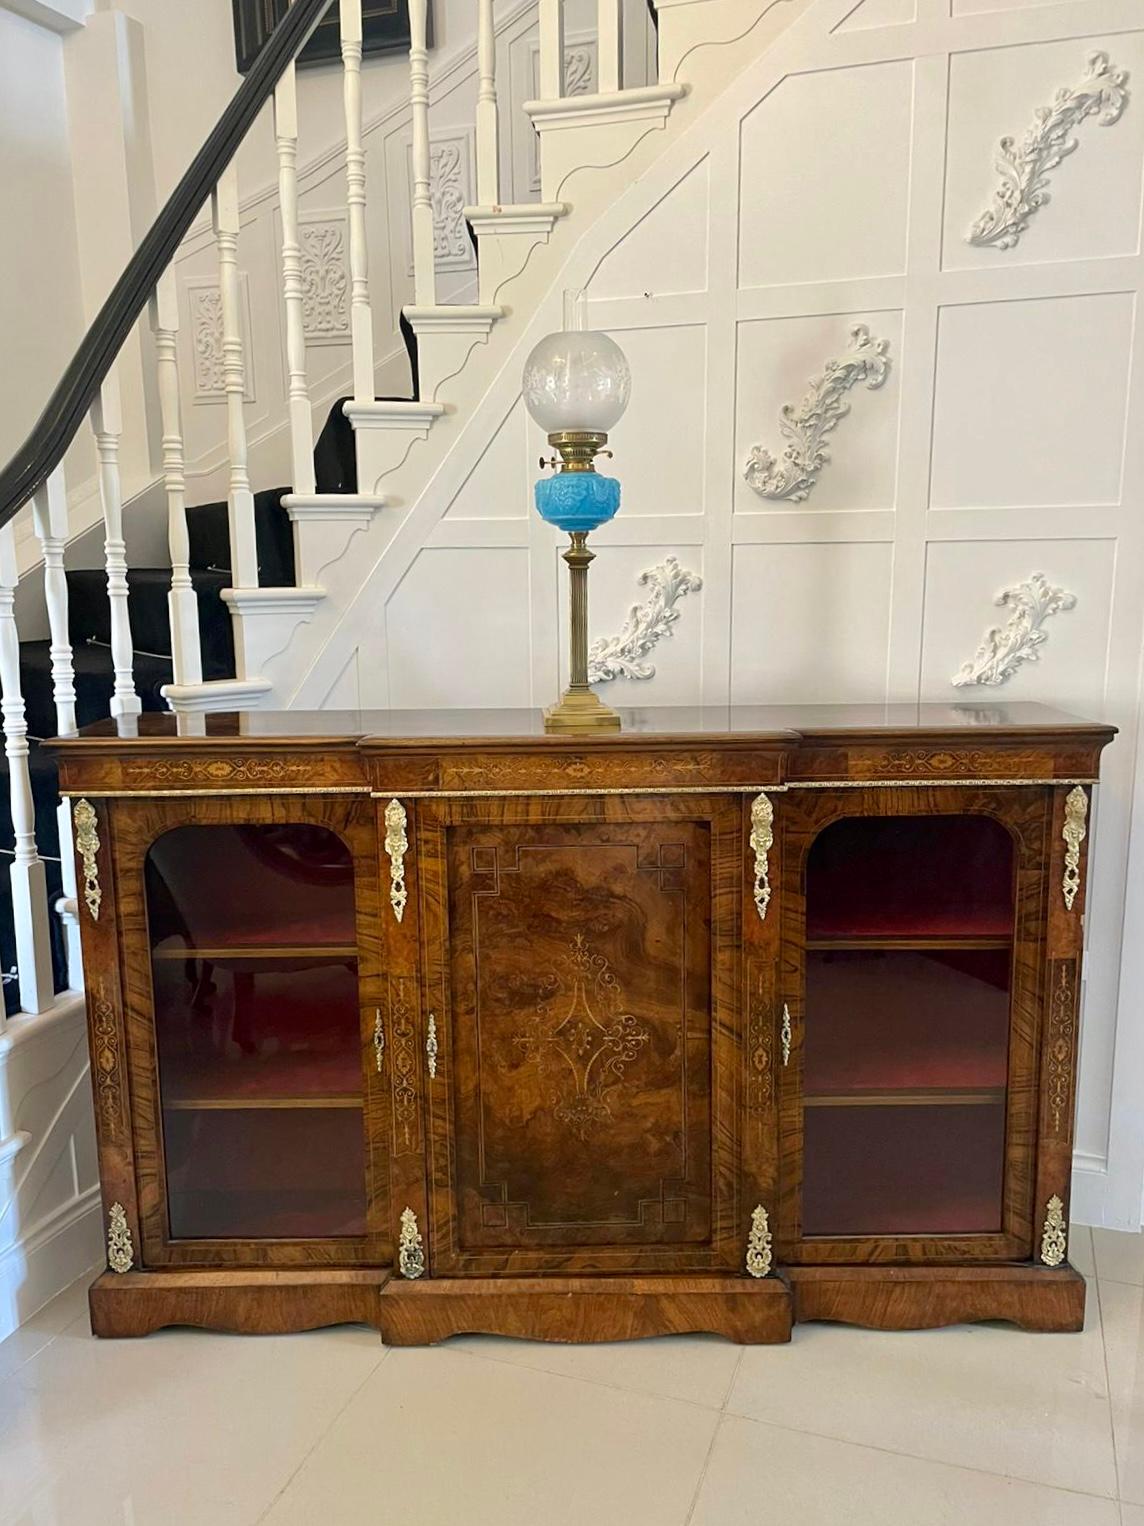 Outstanding antique Victorian brass Corinthian column oil lamp having a very pleasing stepped square base and reeded column. An attractive ornate blue font, duplex burner, pretty etched glass shade and original chimney.
 
A beautiful decorative 